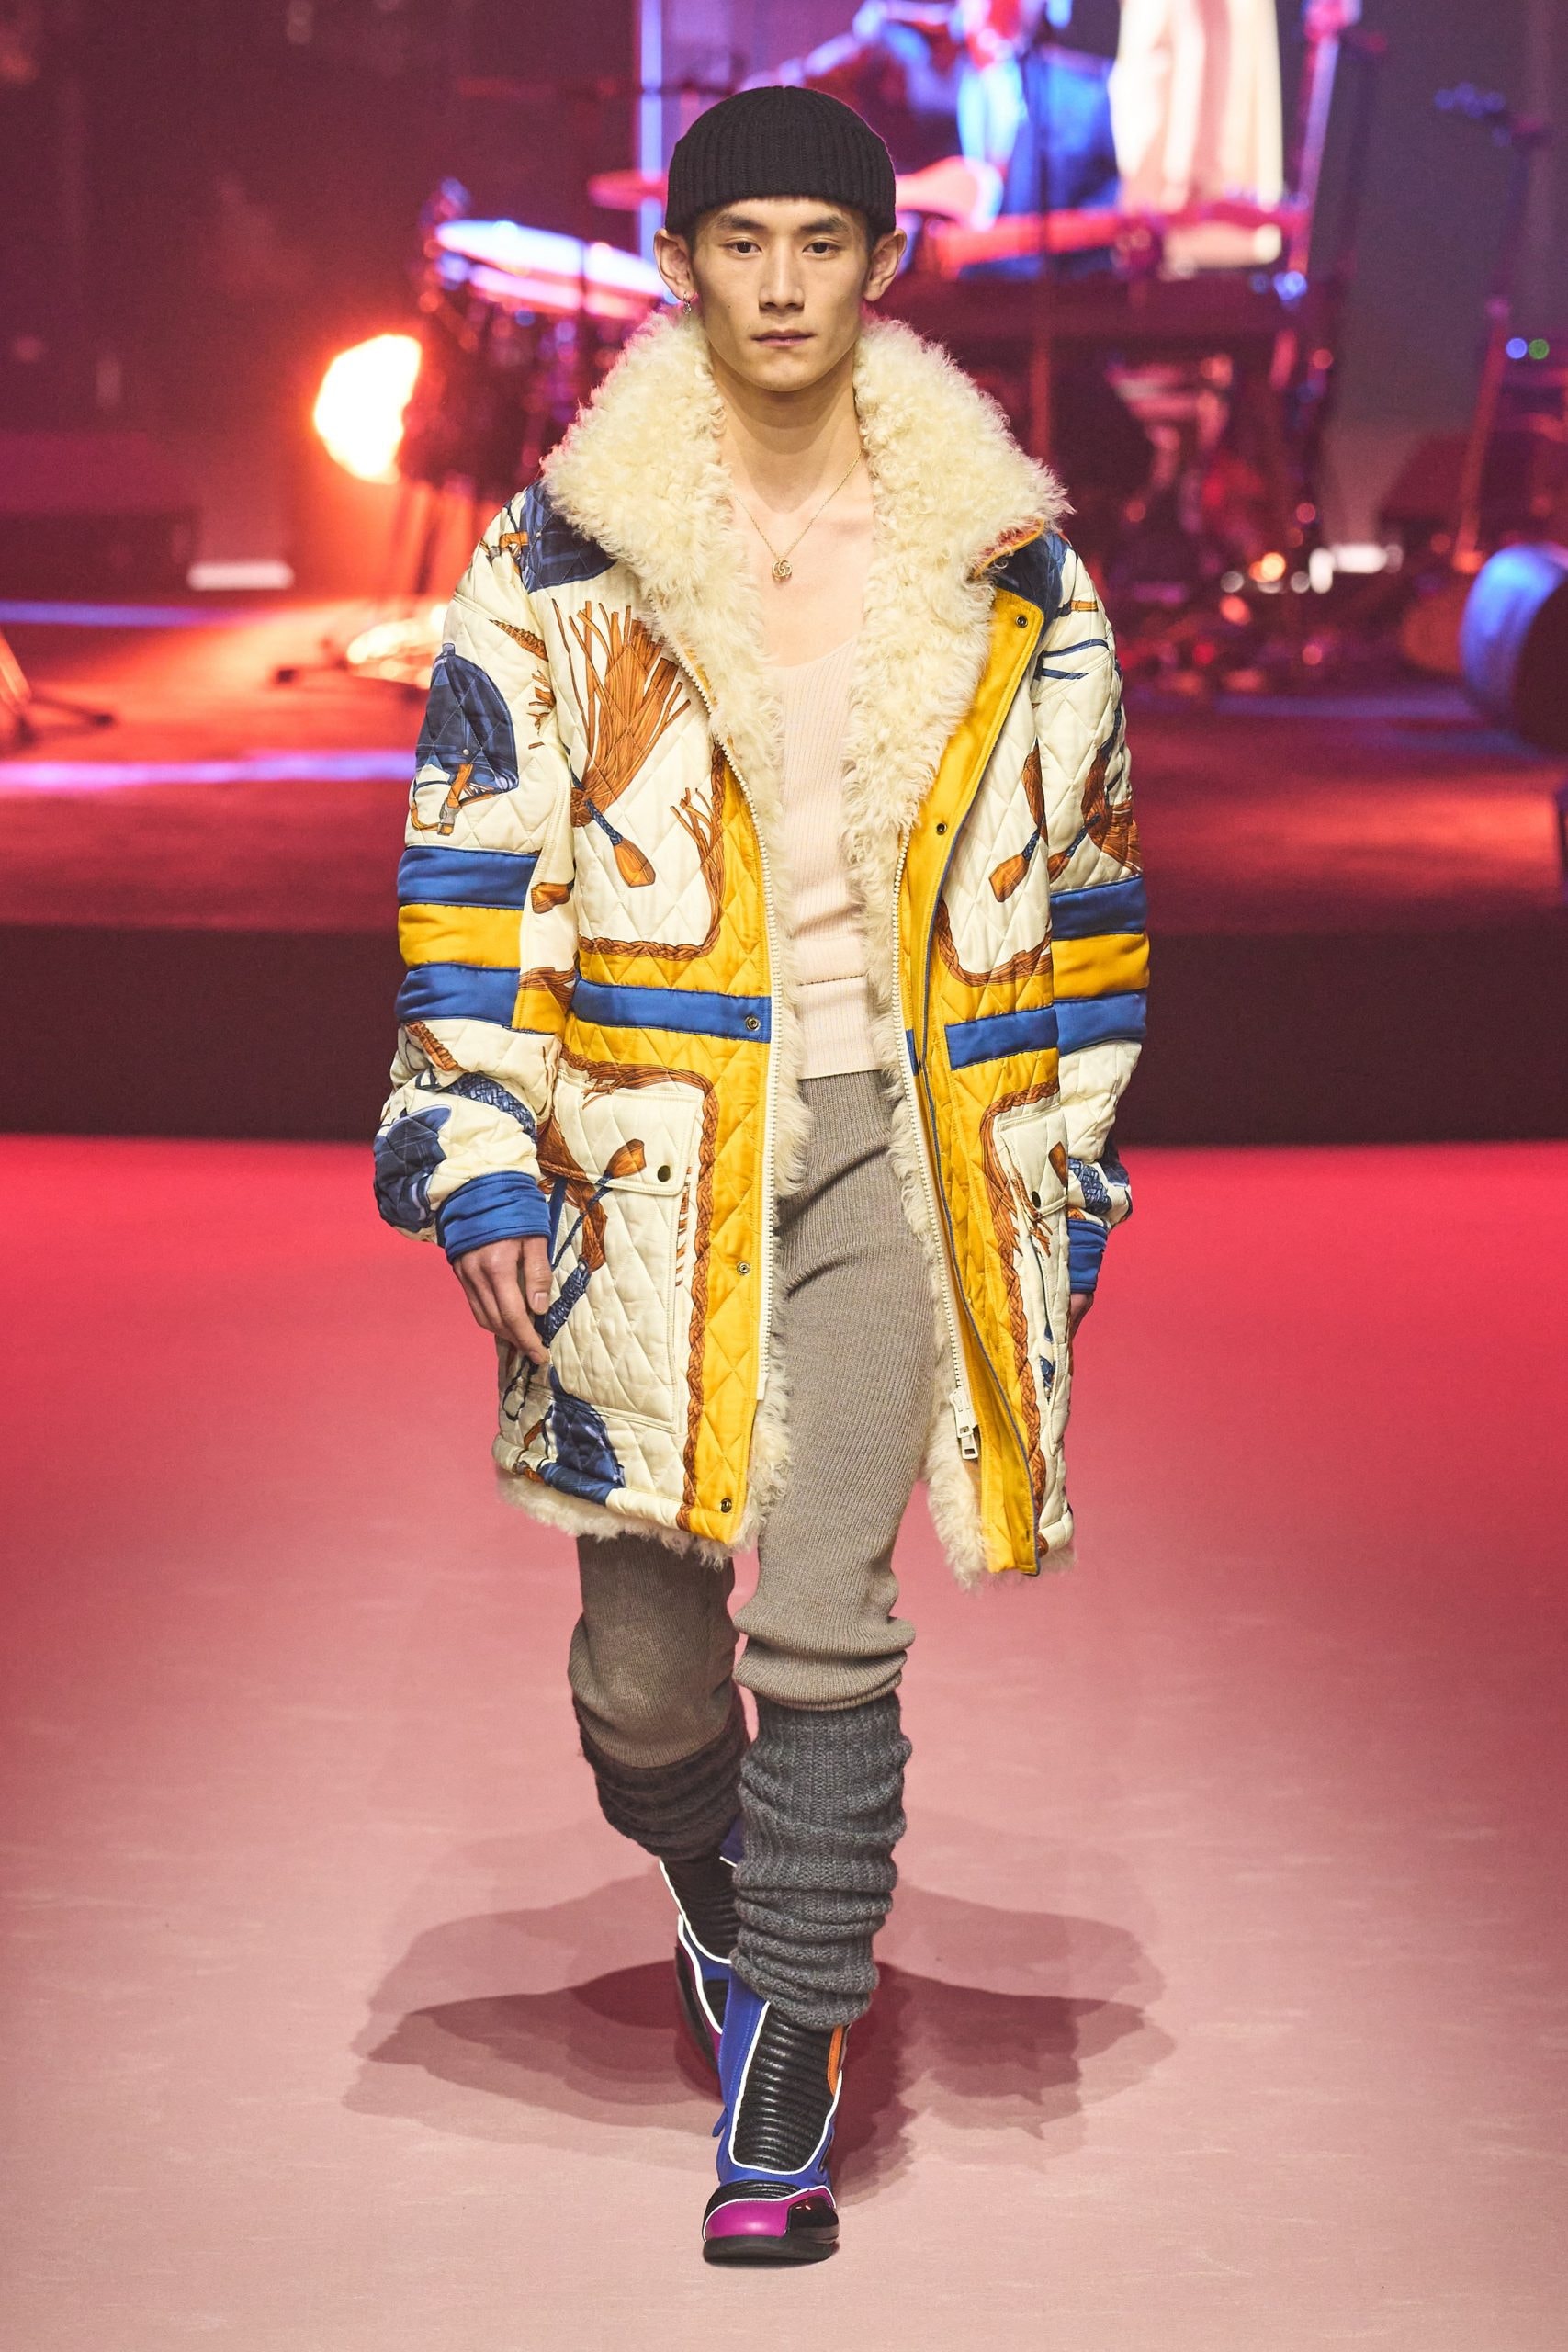 gucci fall winter menswear milan fashion week first collection without alessandro michele